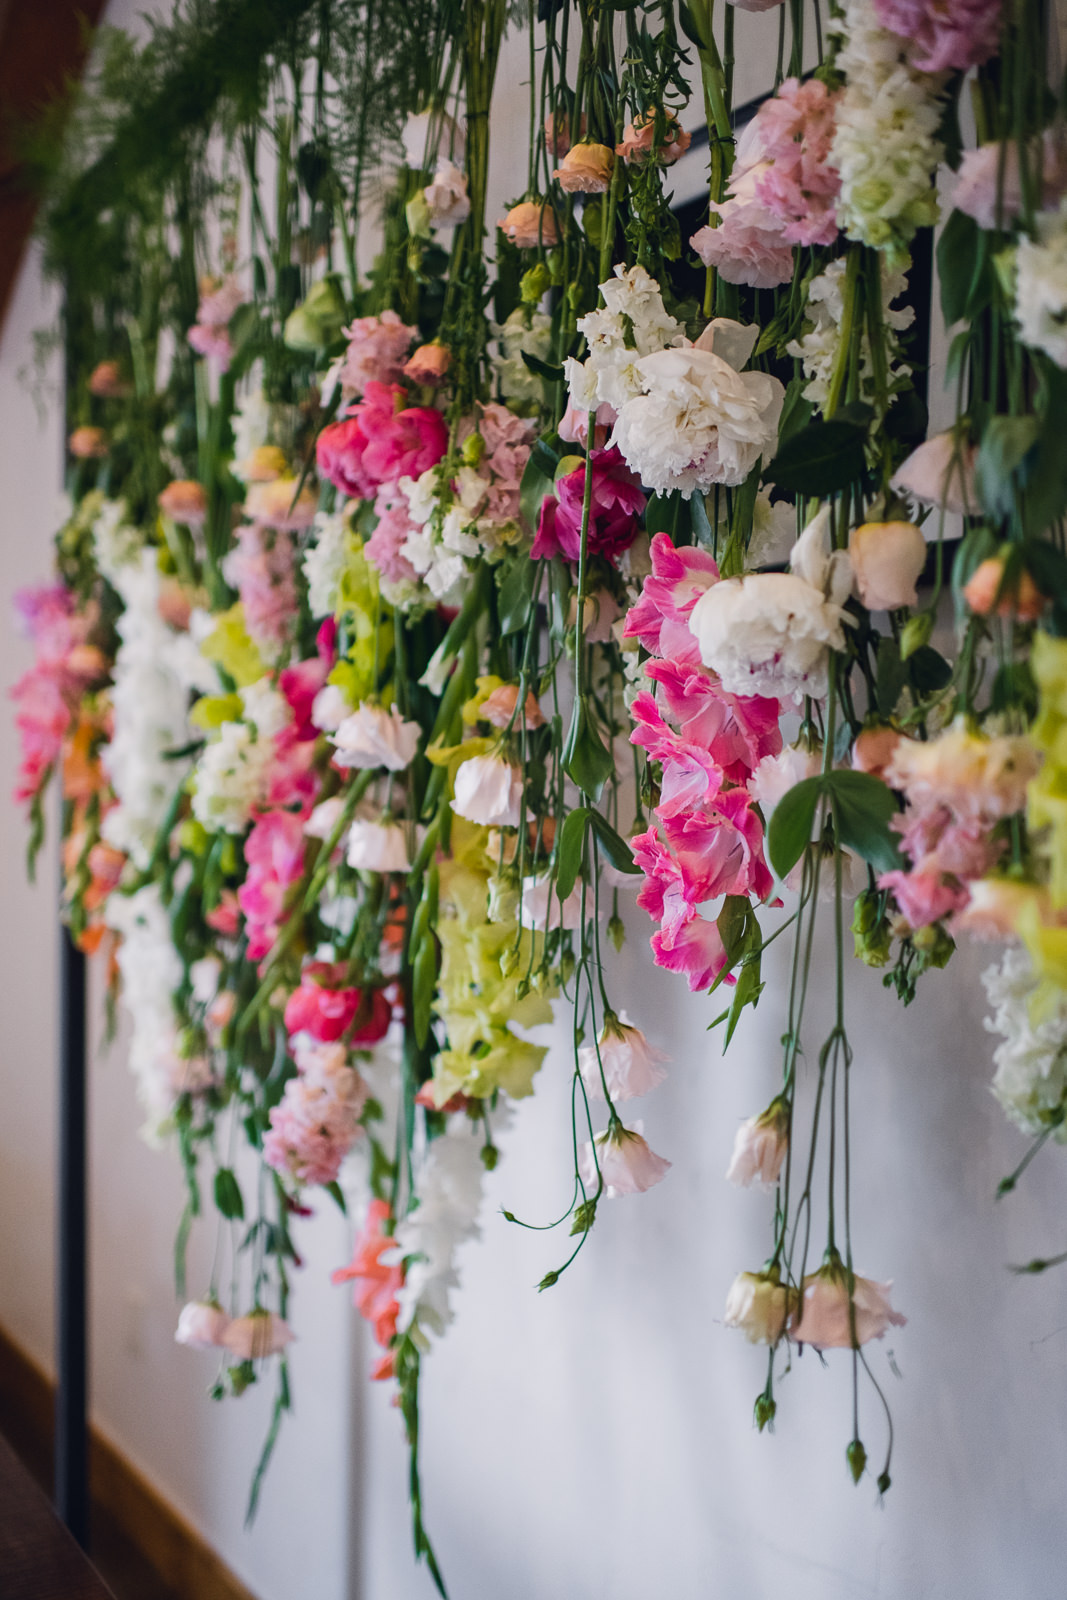 floral cake backdrop of hanging flowers